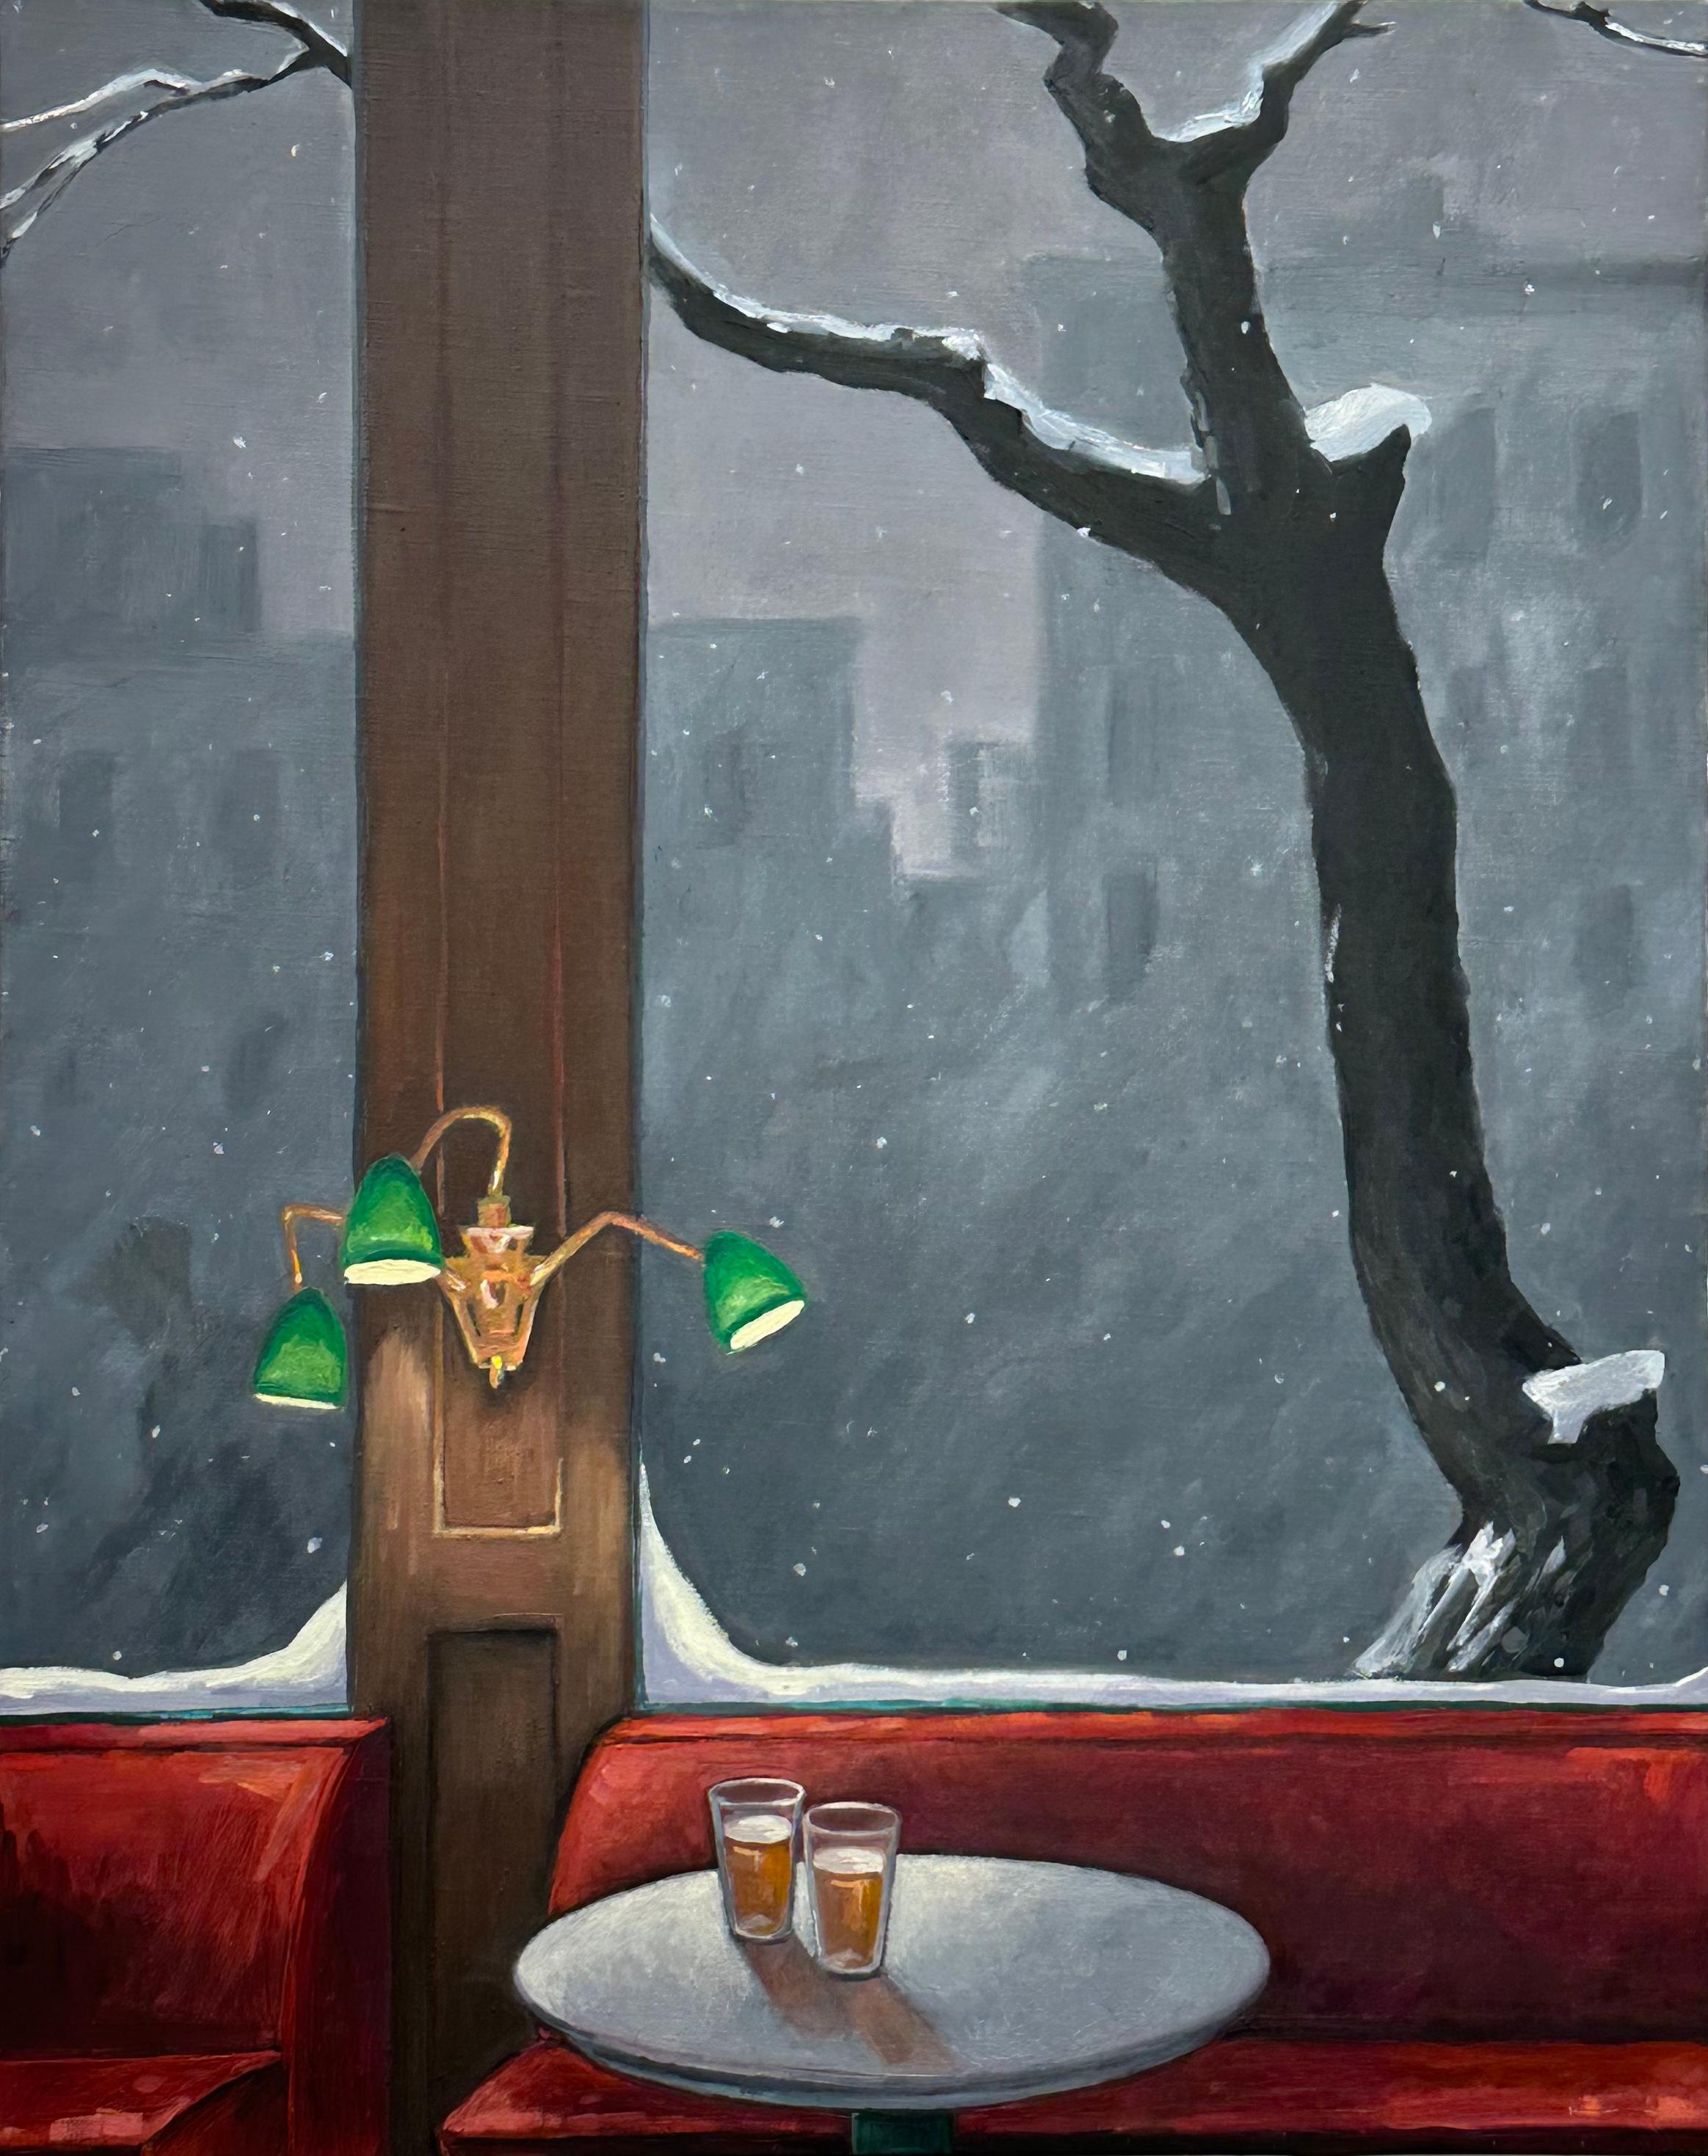 Two Beers, Green Lamps, Dark Red, Glasses, Snow Outside, Winter Bar Still Life